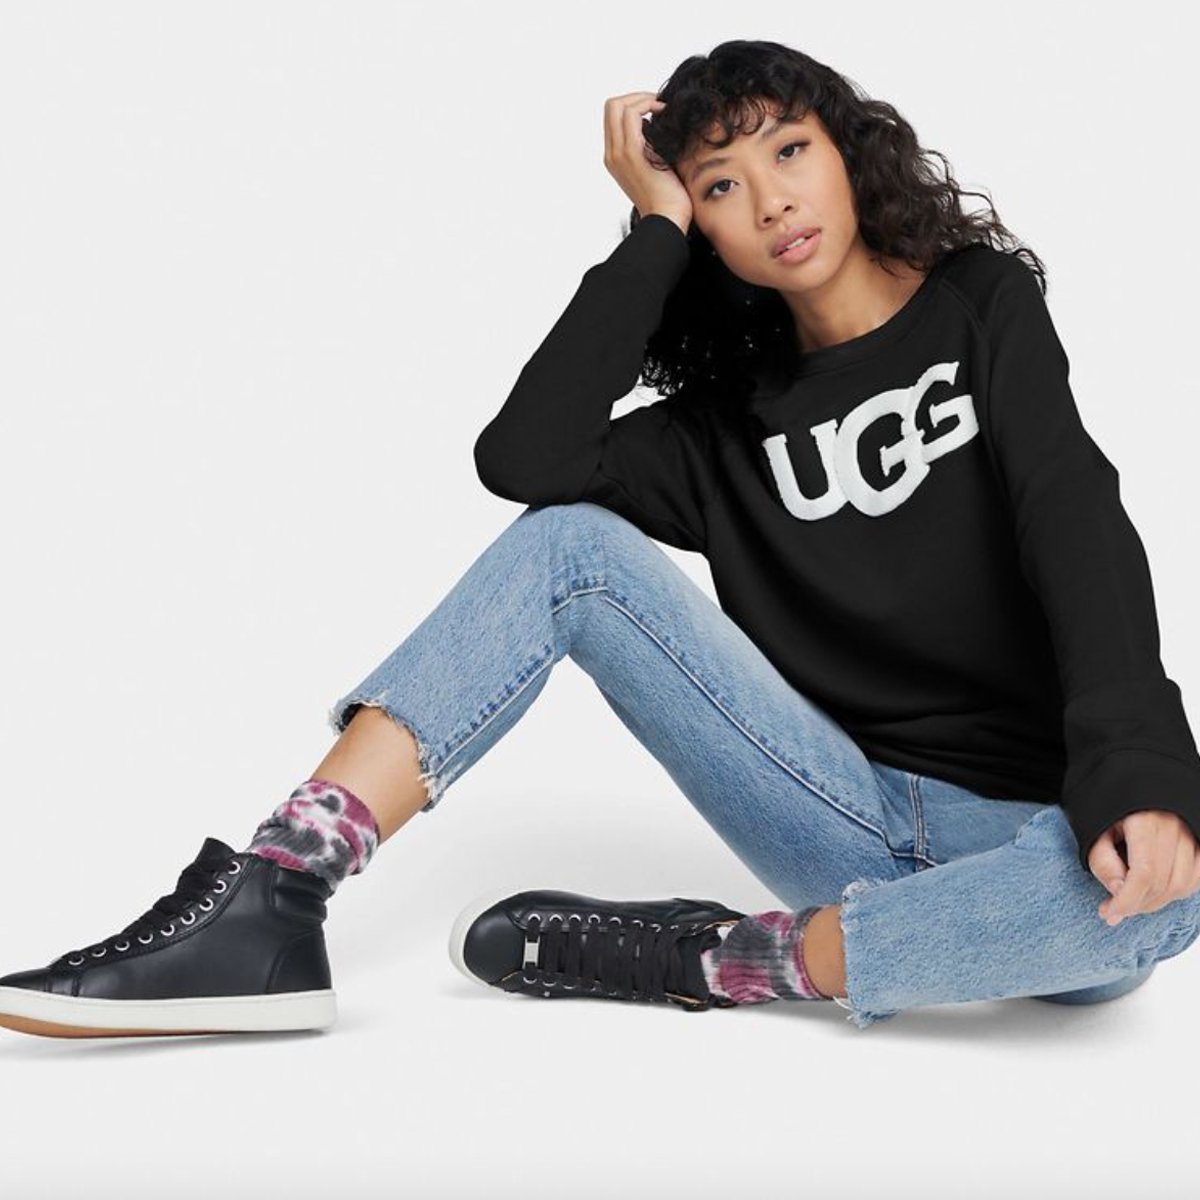 Nordstrom Rack has major deals on Ugg boots and slippers up to 60% off 